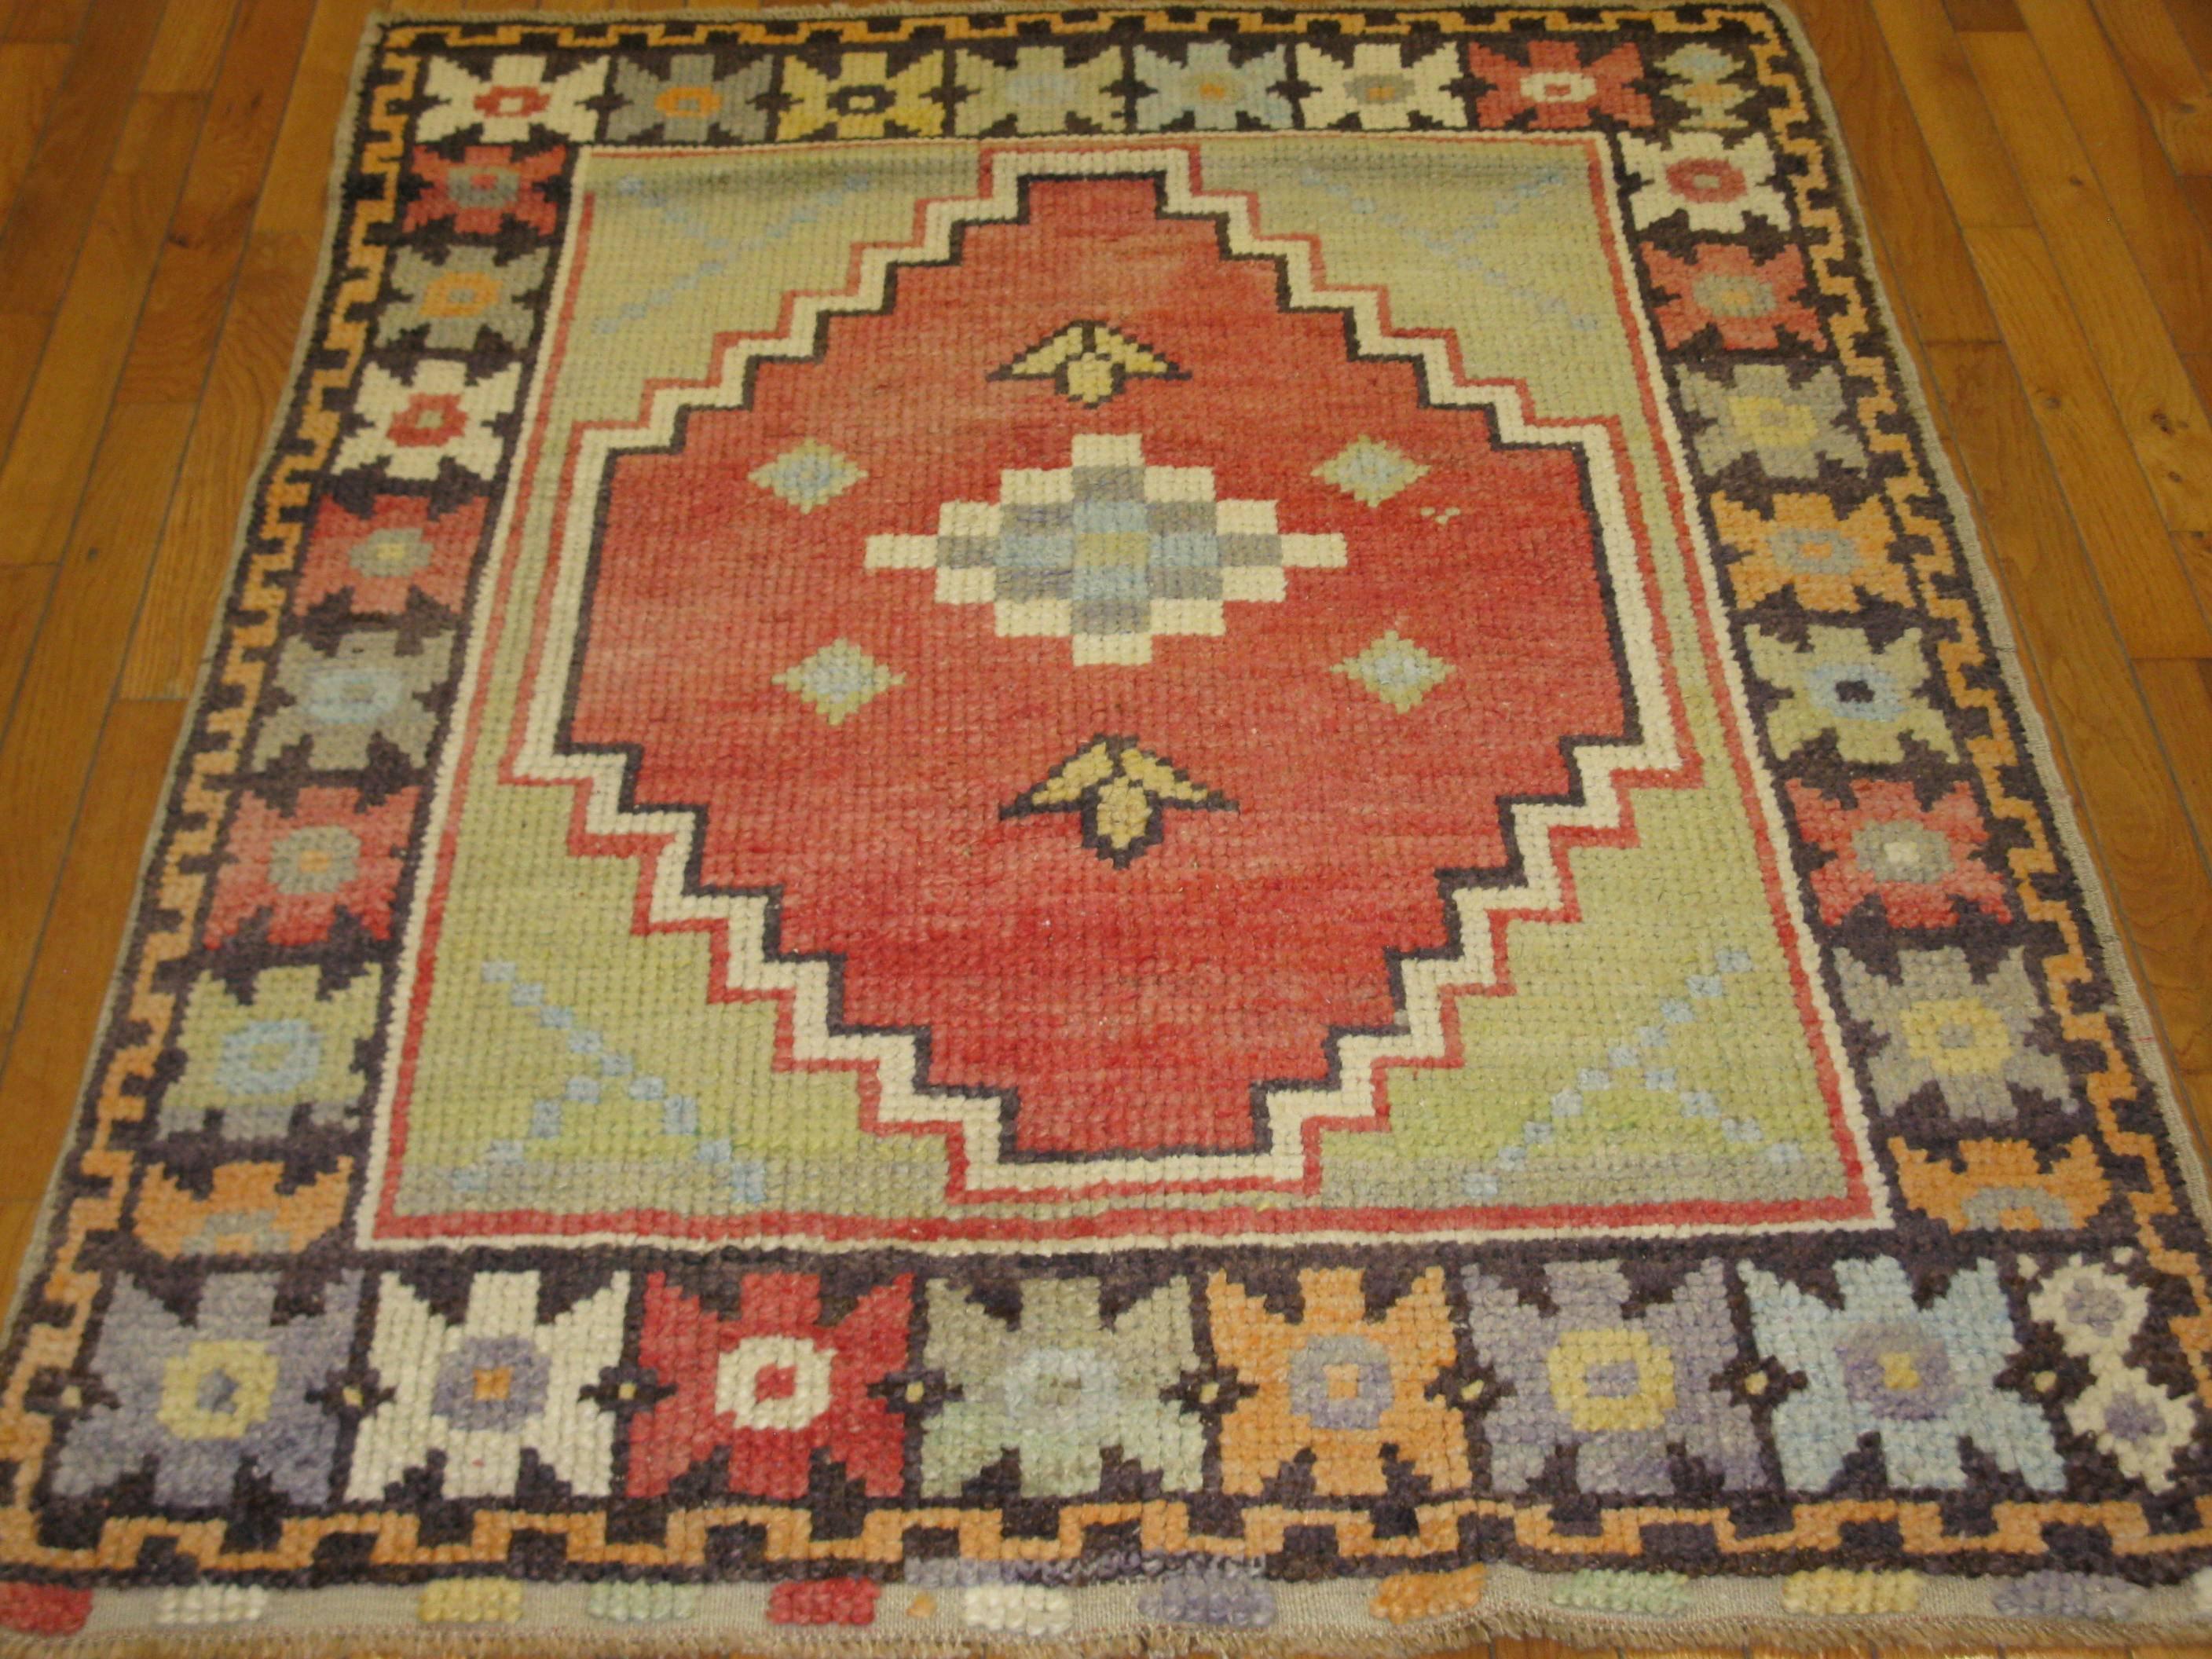 This is a beautiful small hand-knotted vintage rug from the Anatolian region of Turkey. The rug has a tribal design made with all wool and vegetable dyes. It measures 3' 8'' x 4' 8'' and in great condition.